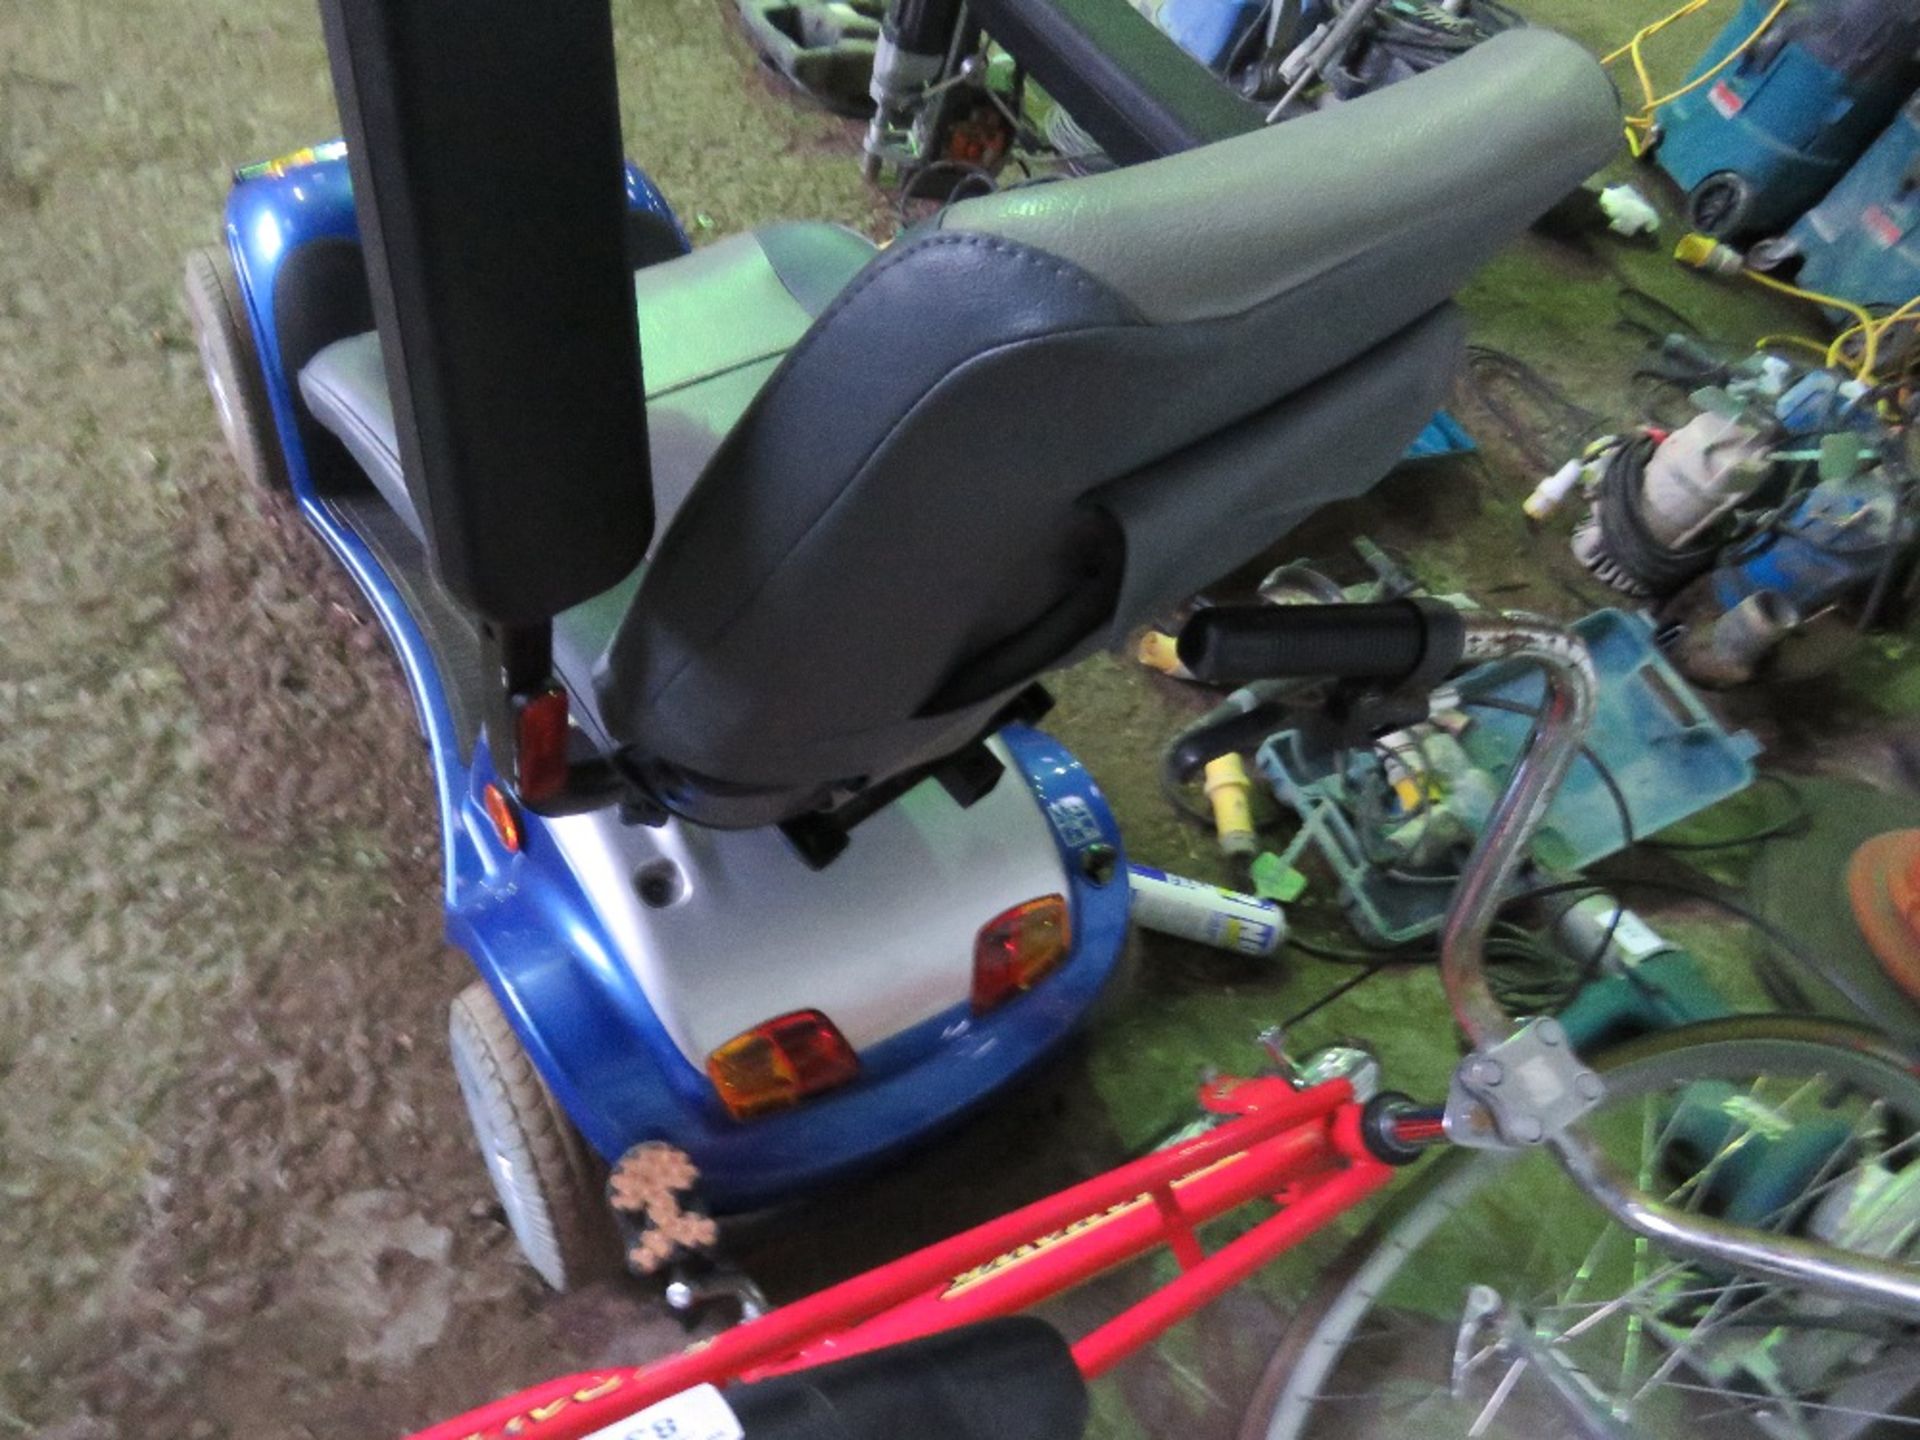 KYMCO 8MPH MOBILITY SCOOTER C/W CHARGER. ROAD REGISTERED REG:Q258 KFE (FIRST REGISTERED 07/2019... - Image 3 of 7